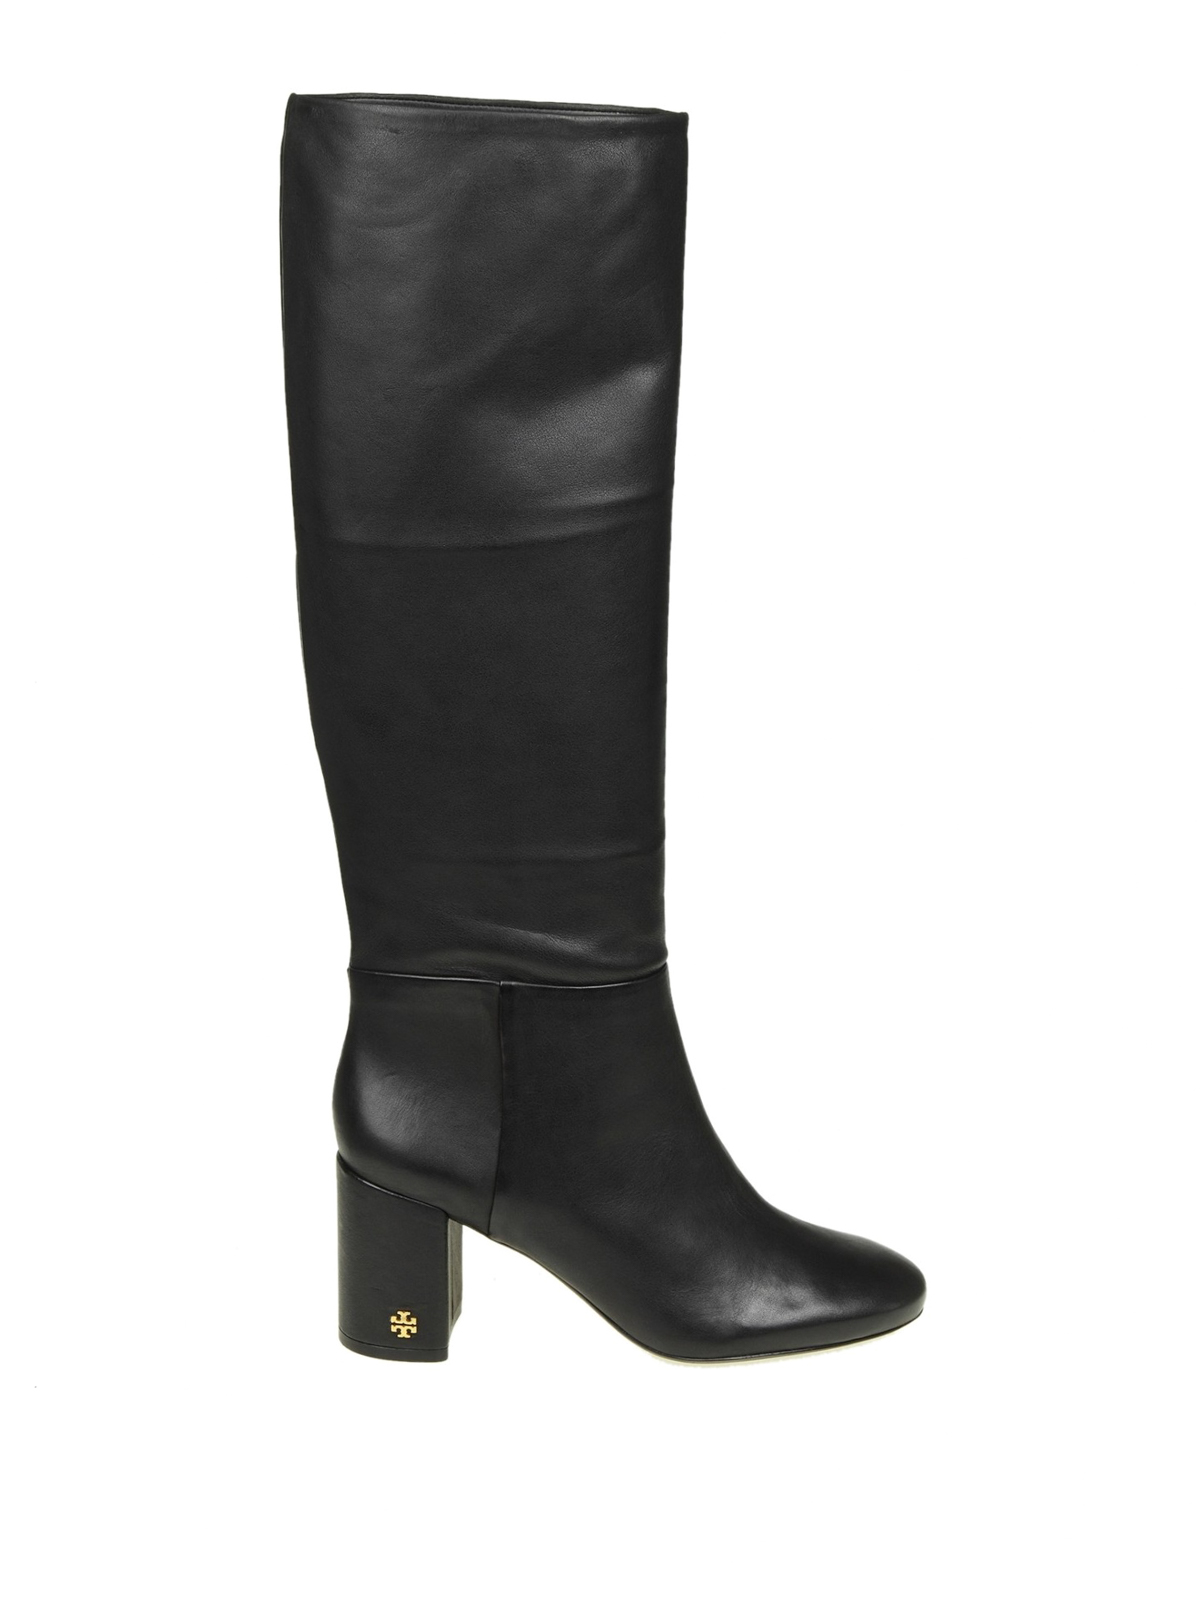 Buy > tory burch brooke boots > in stock